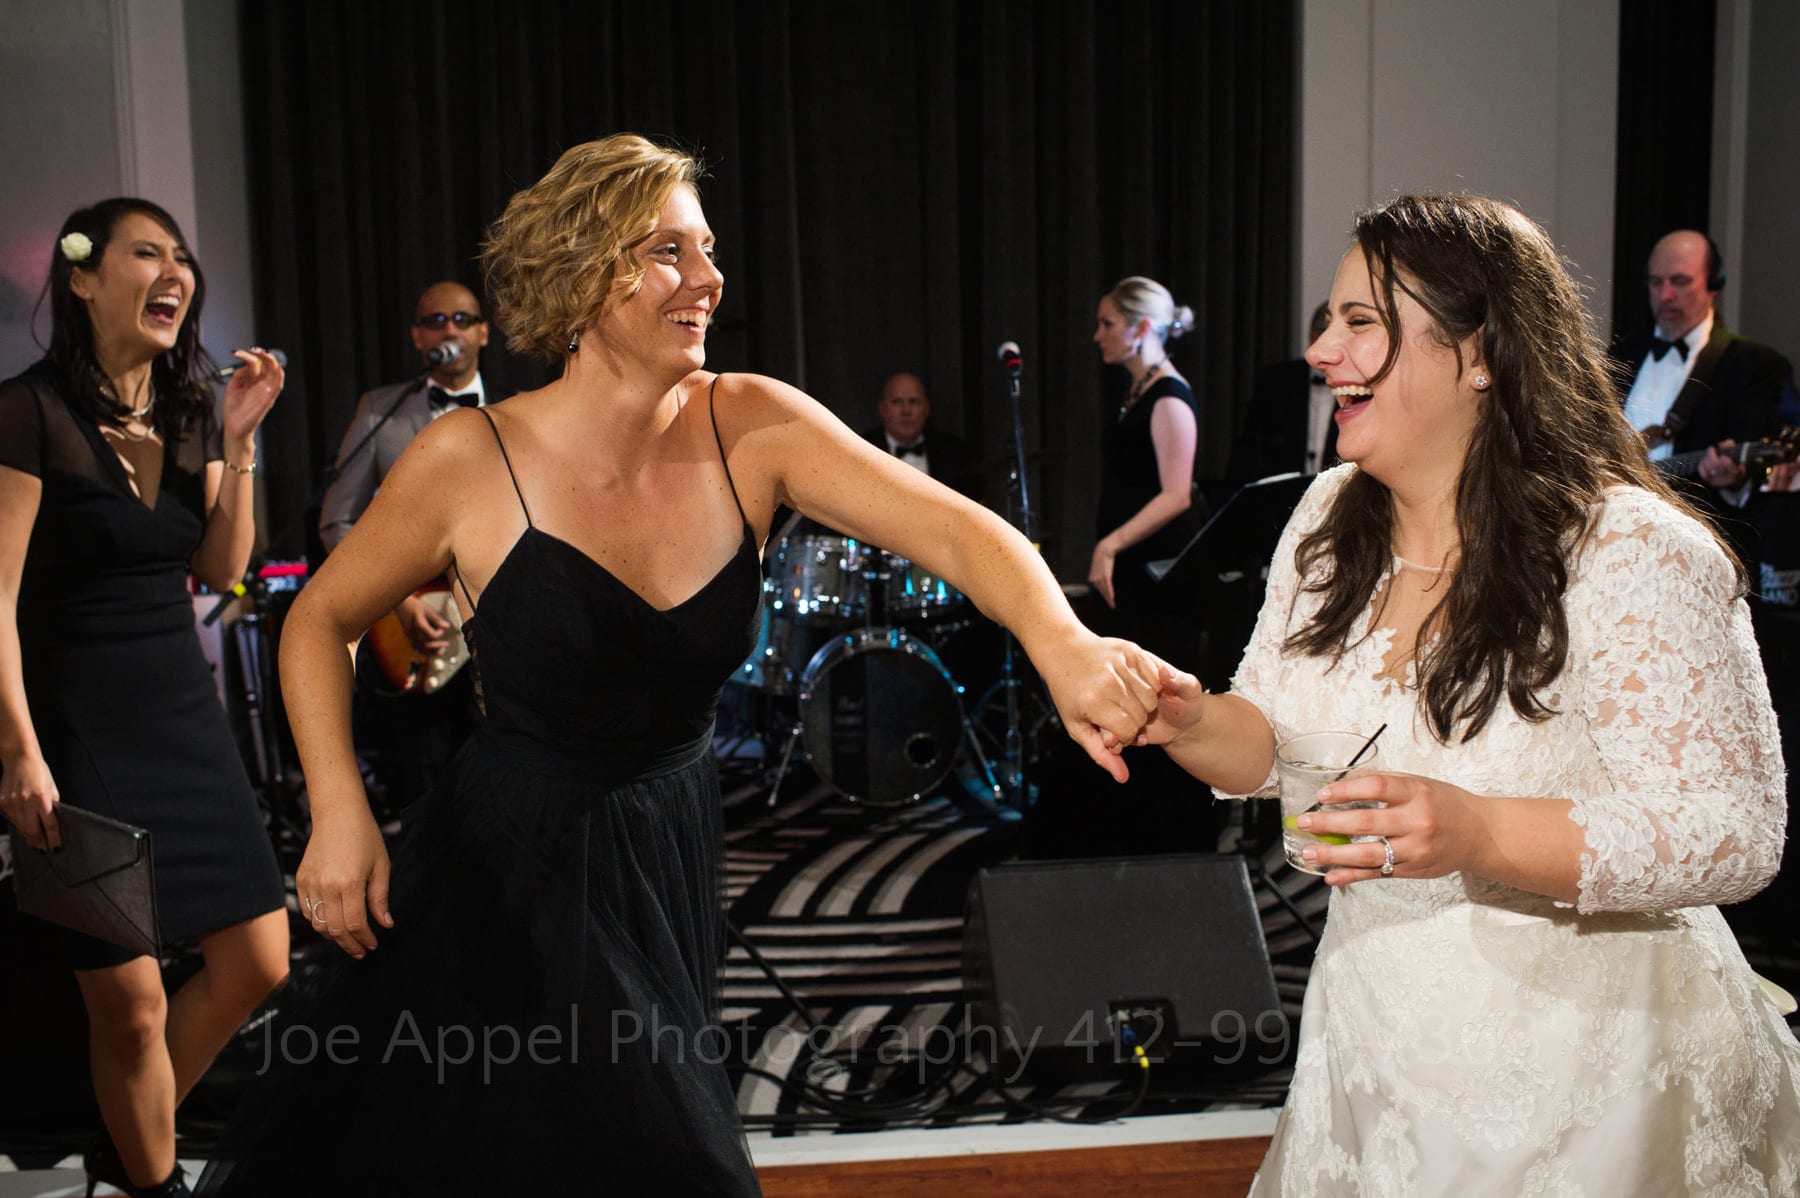 a bride drinks and dances with her maid of honor. They're both sweating and laughing.